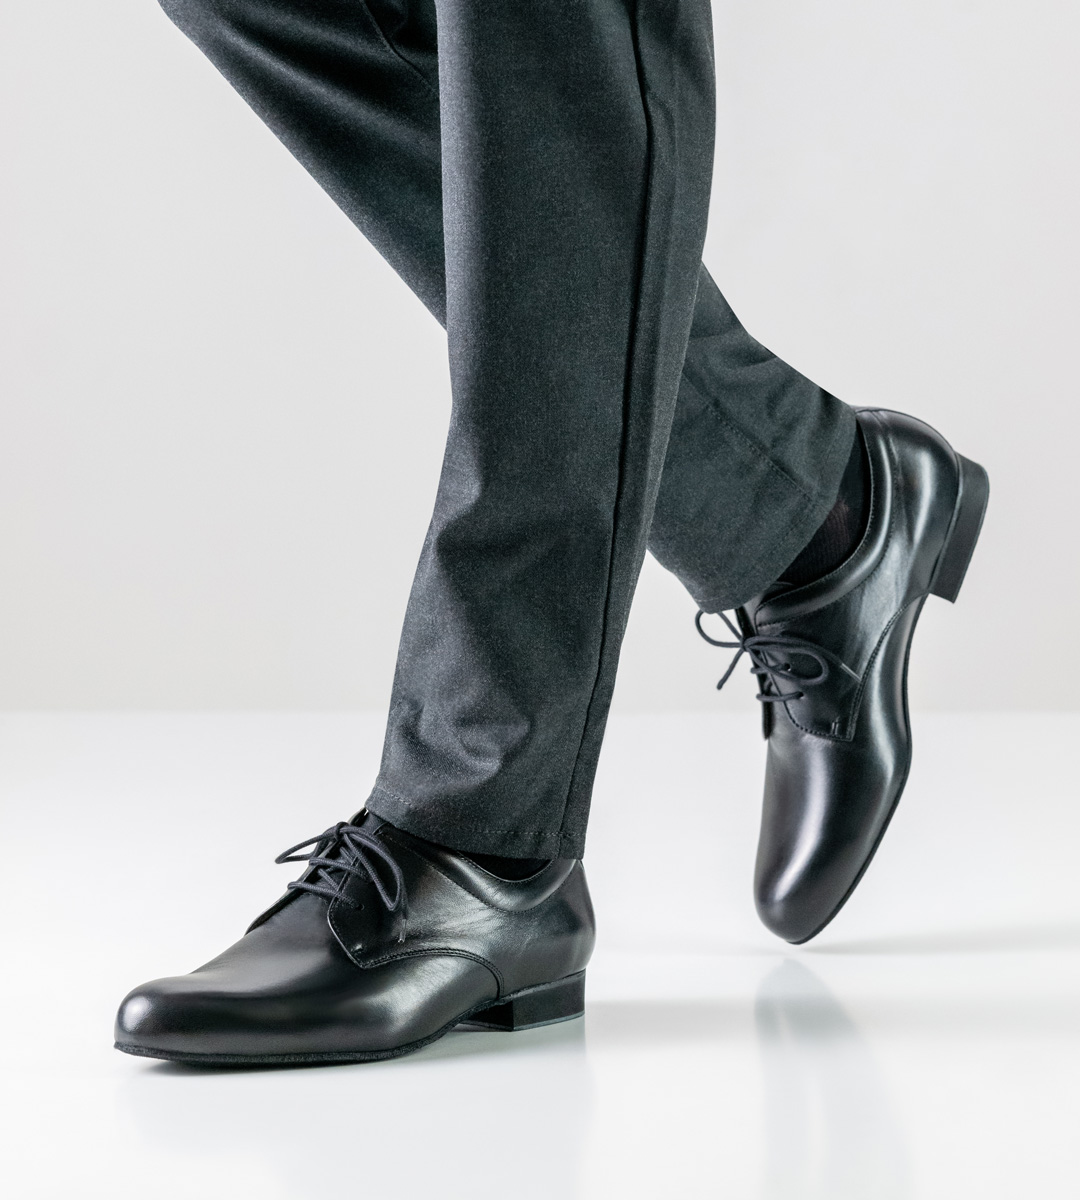 Men's dance shoe from Werner Kern with padding on the edge for standard dances